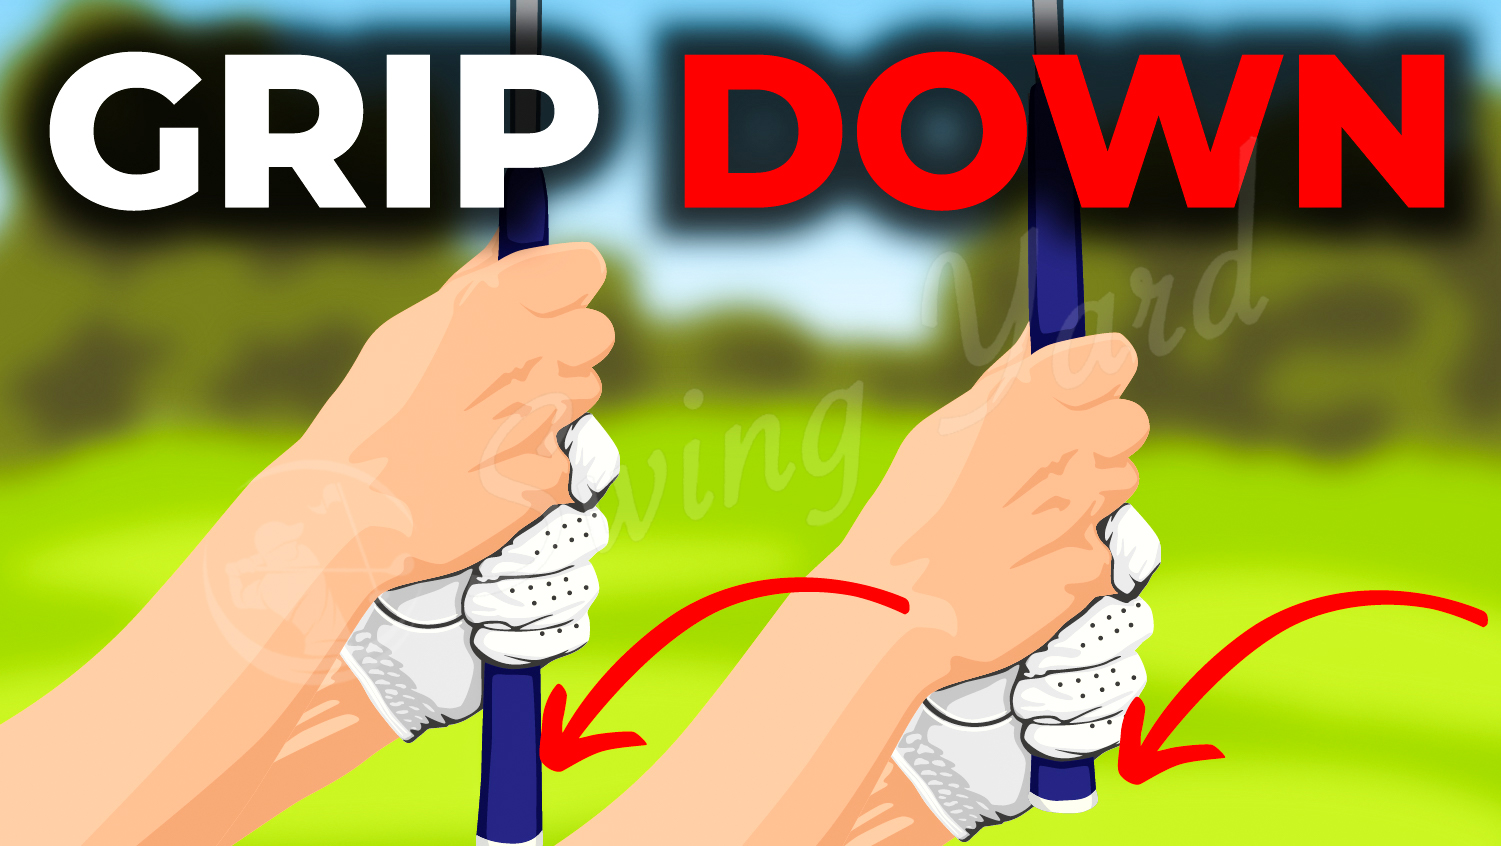 Grip your hands down on the golf club